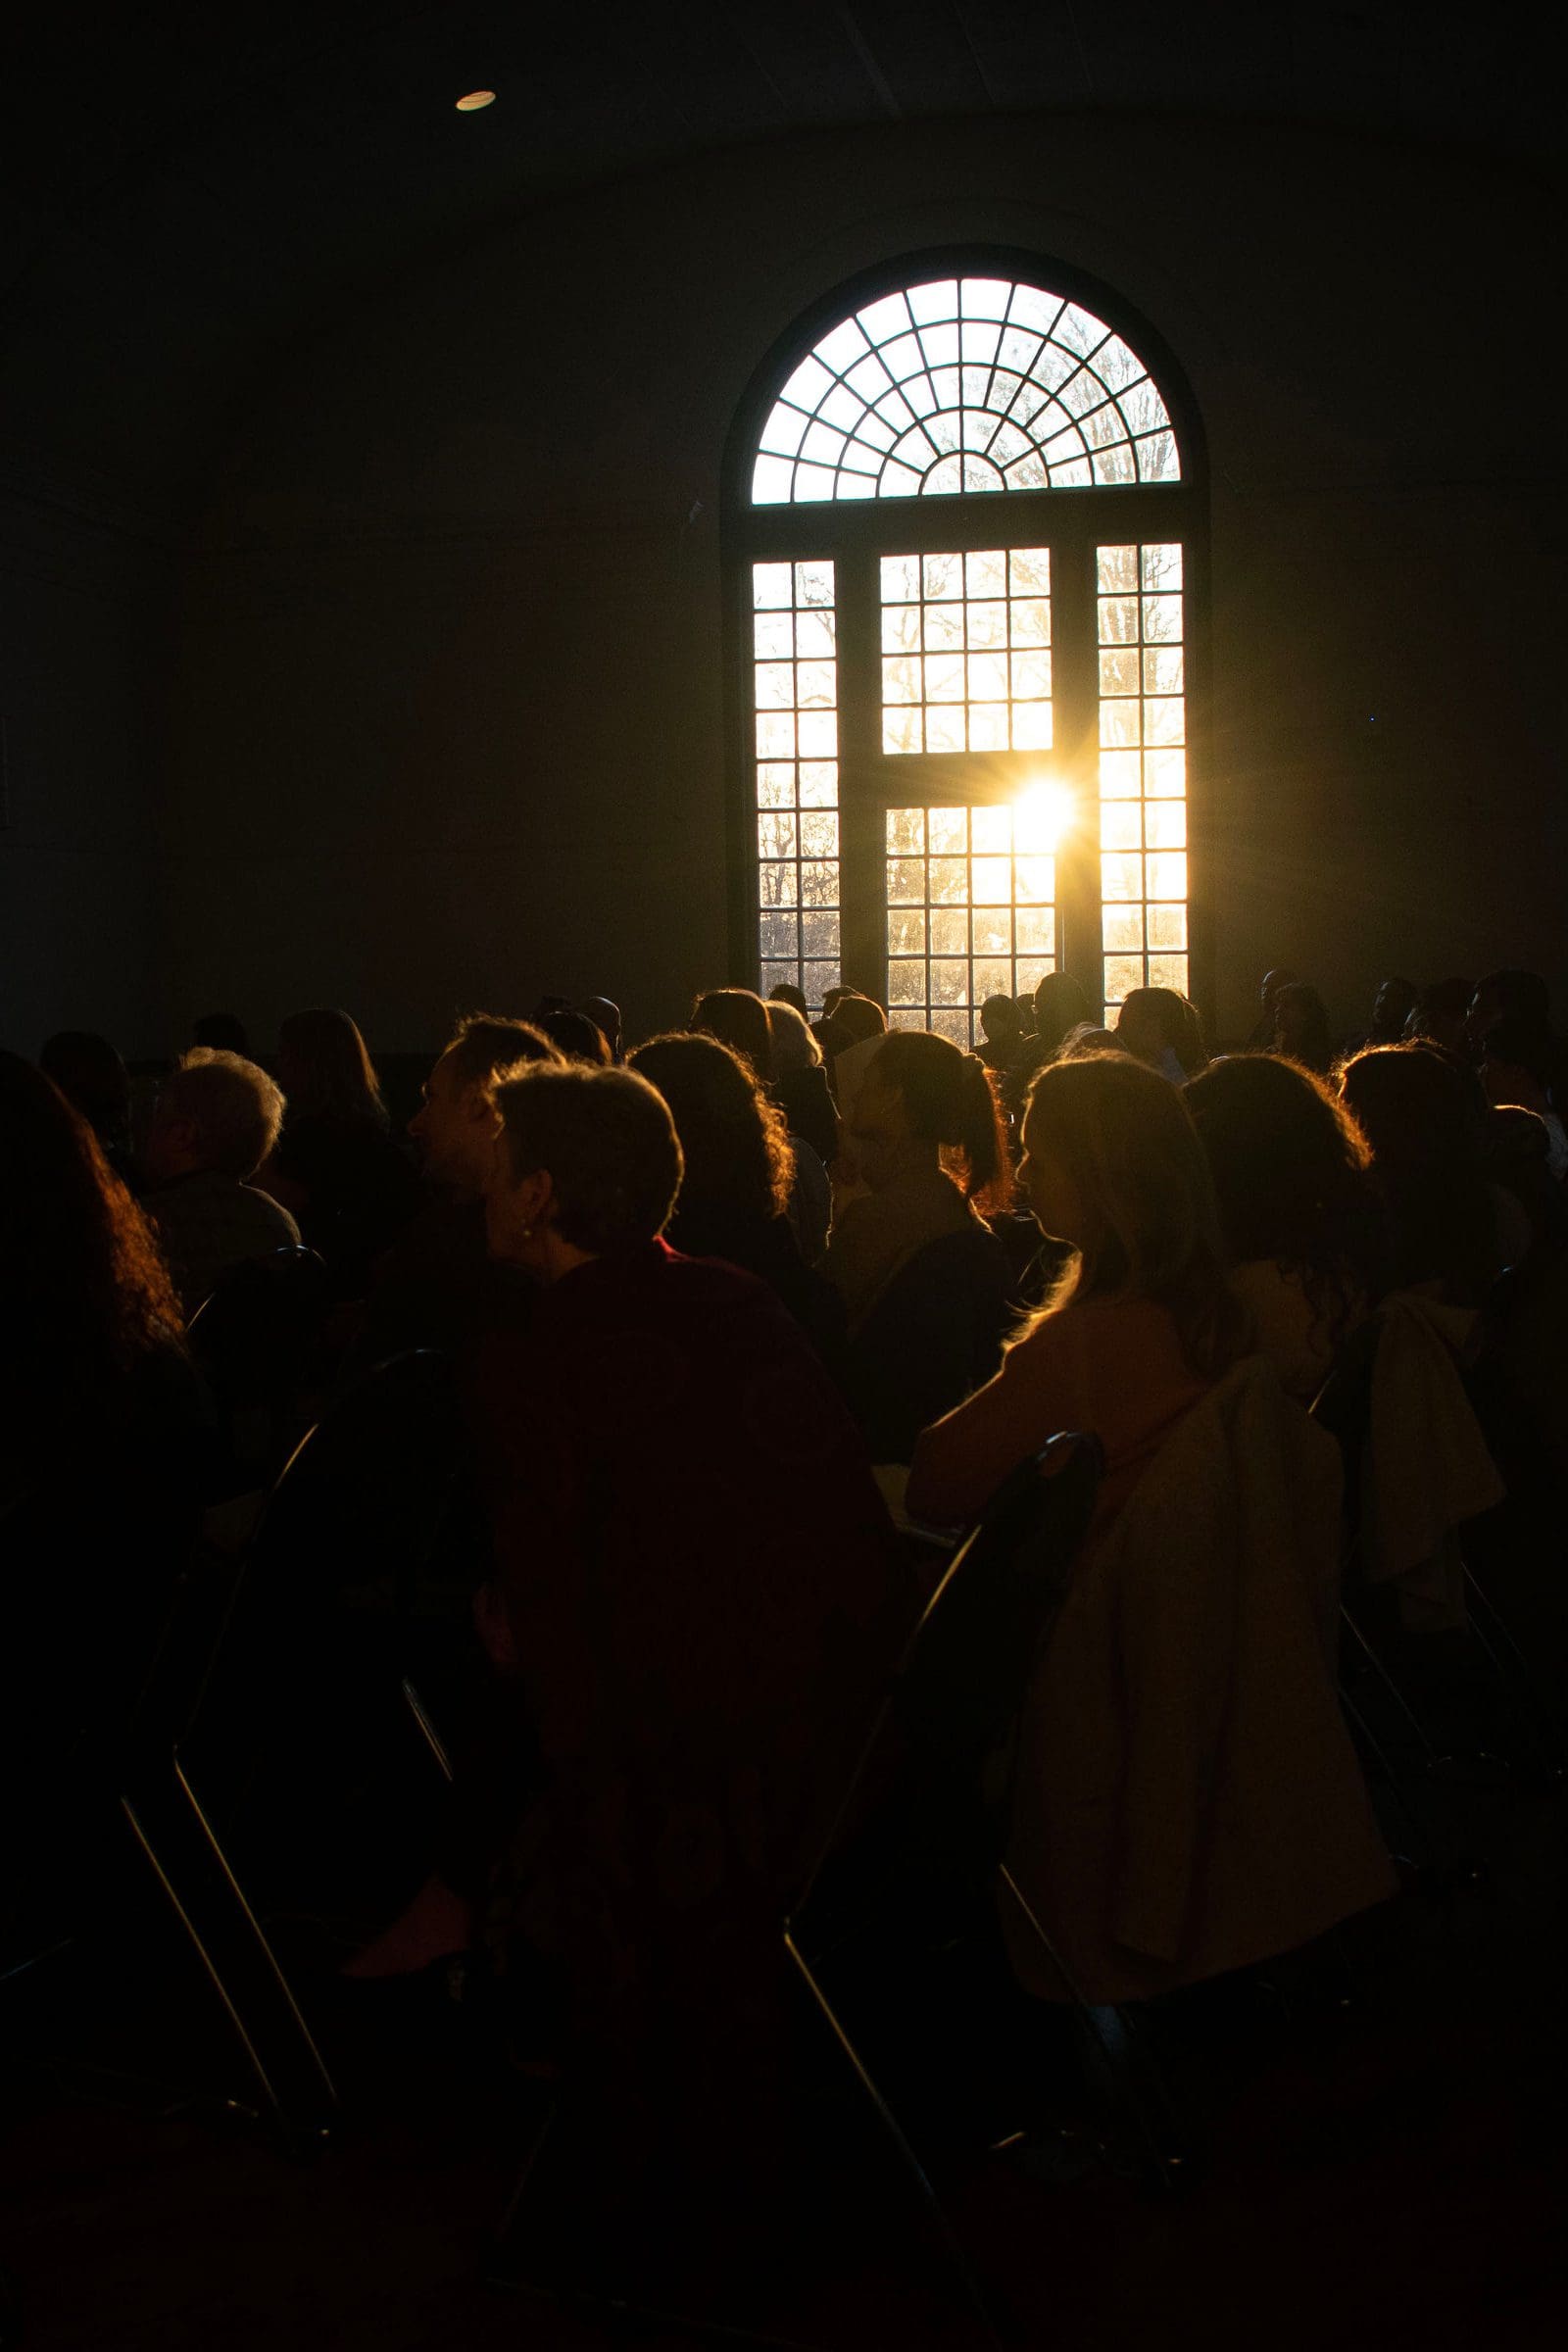 crowd of people in a dark room with a large window letting in sunshine